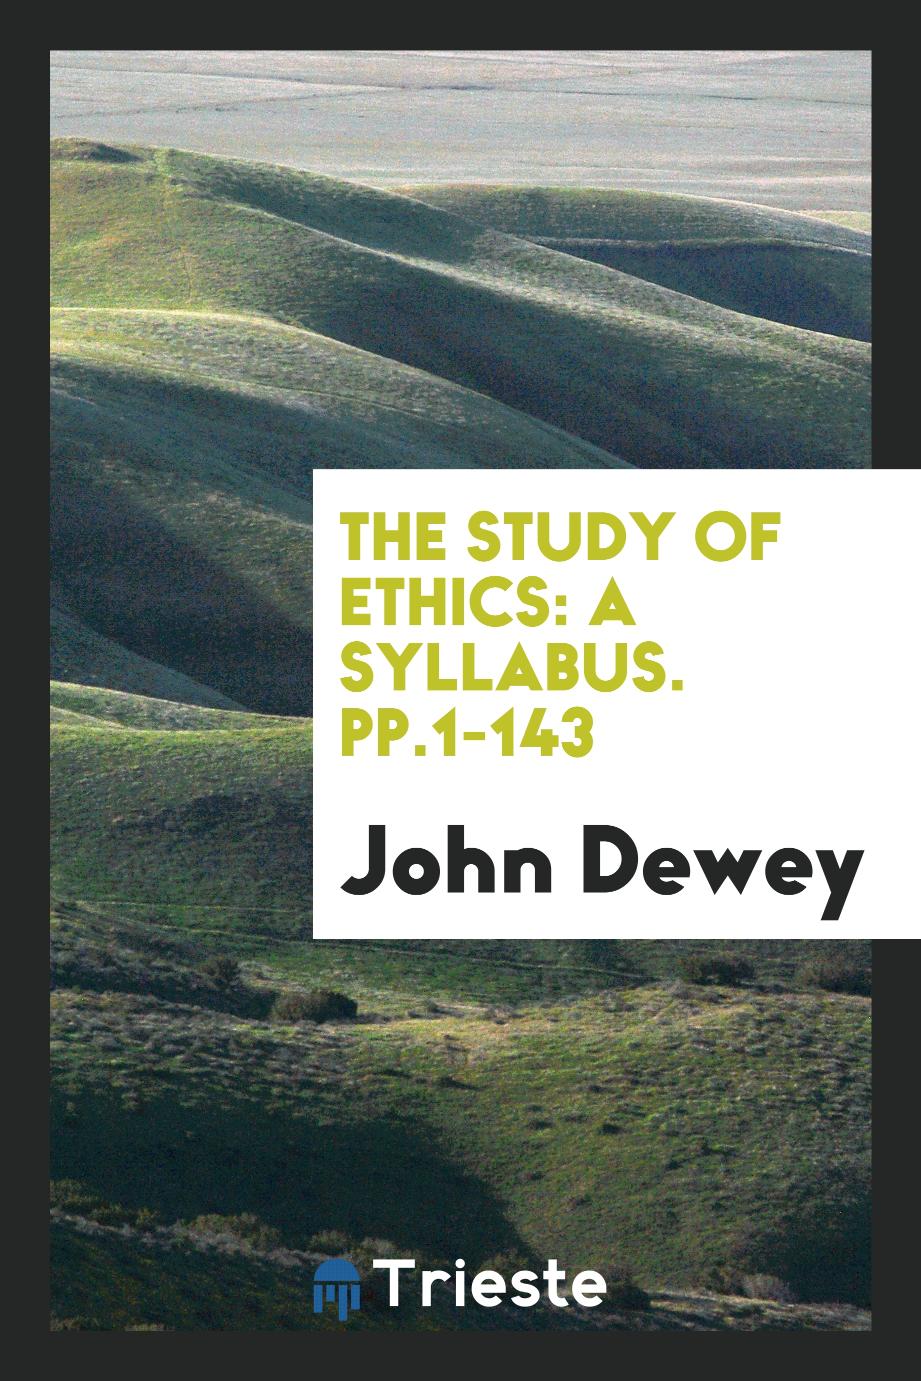 The Study of Ethics: A Syllabus. pp.1-143